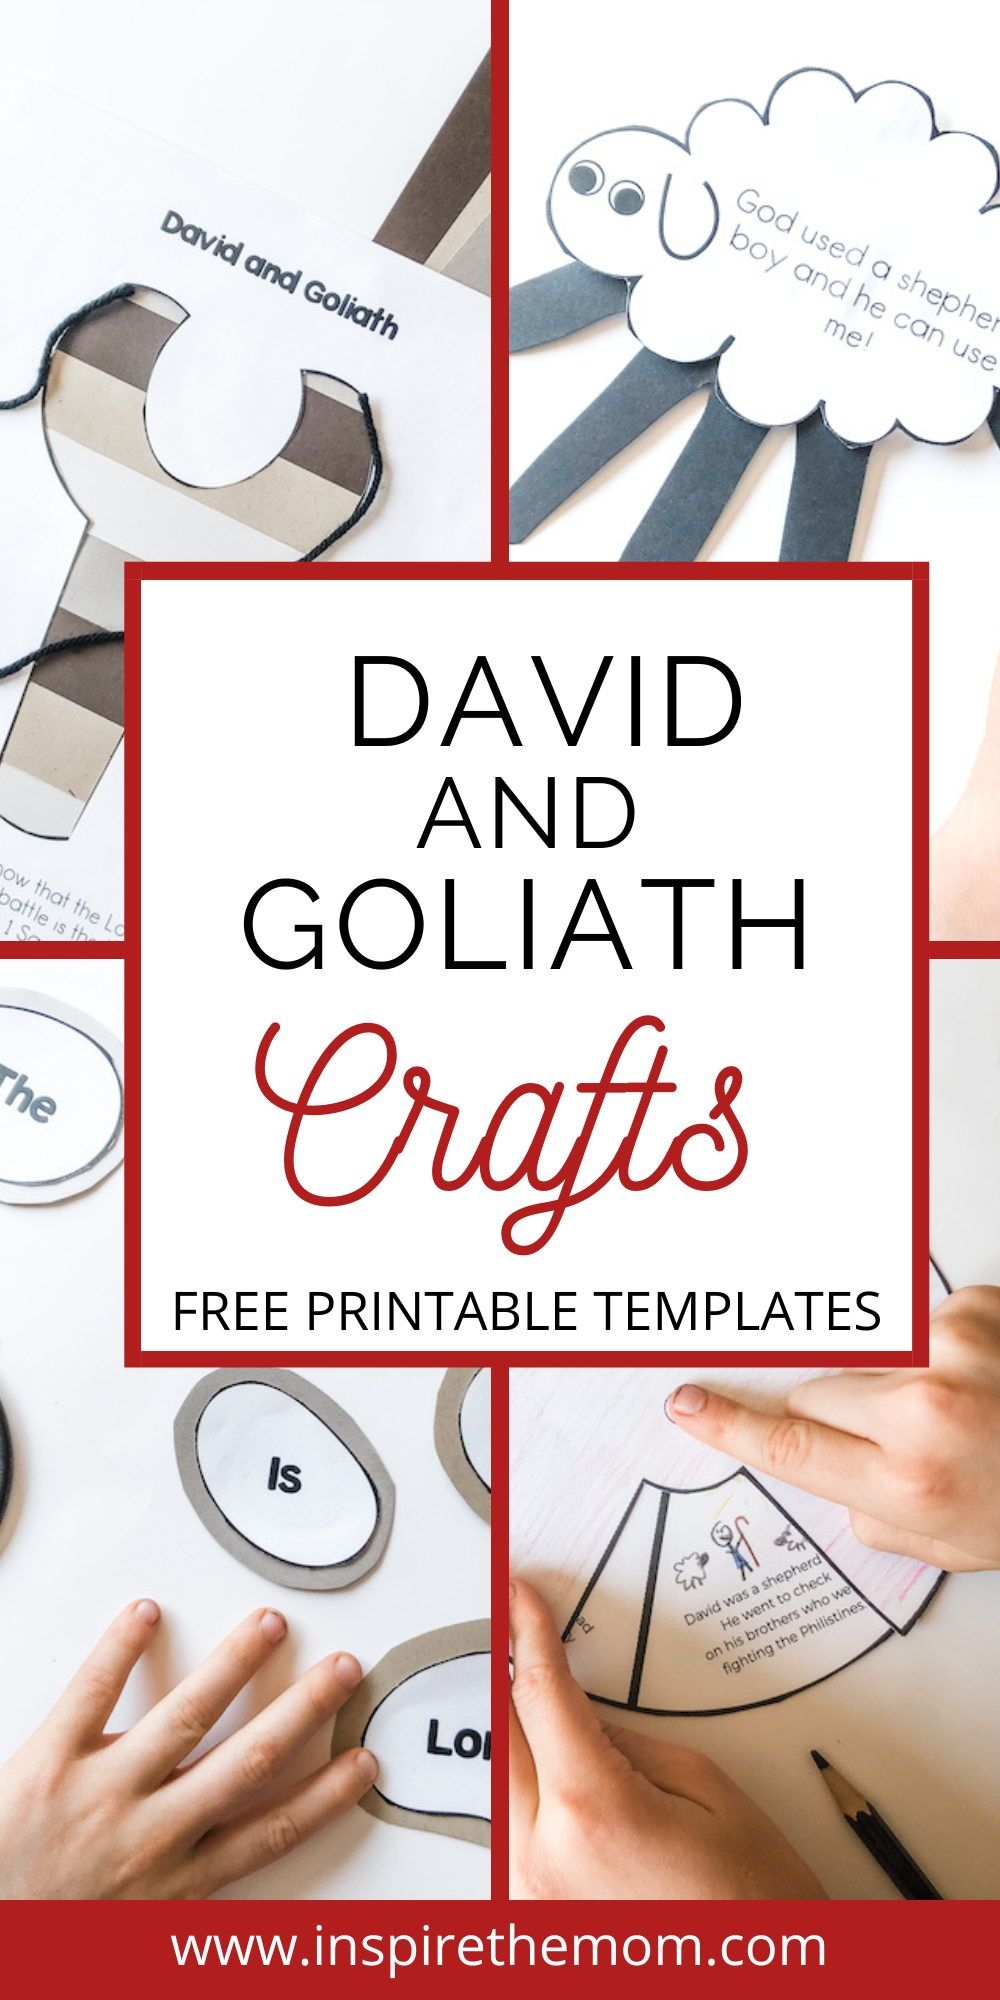 5 David And Goliath Craft Ideas Free Printable Templates David And Goliath David And Goliath Craft David And Goliath Story